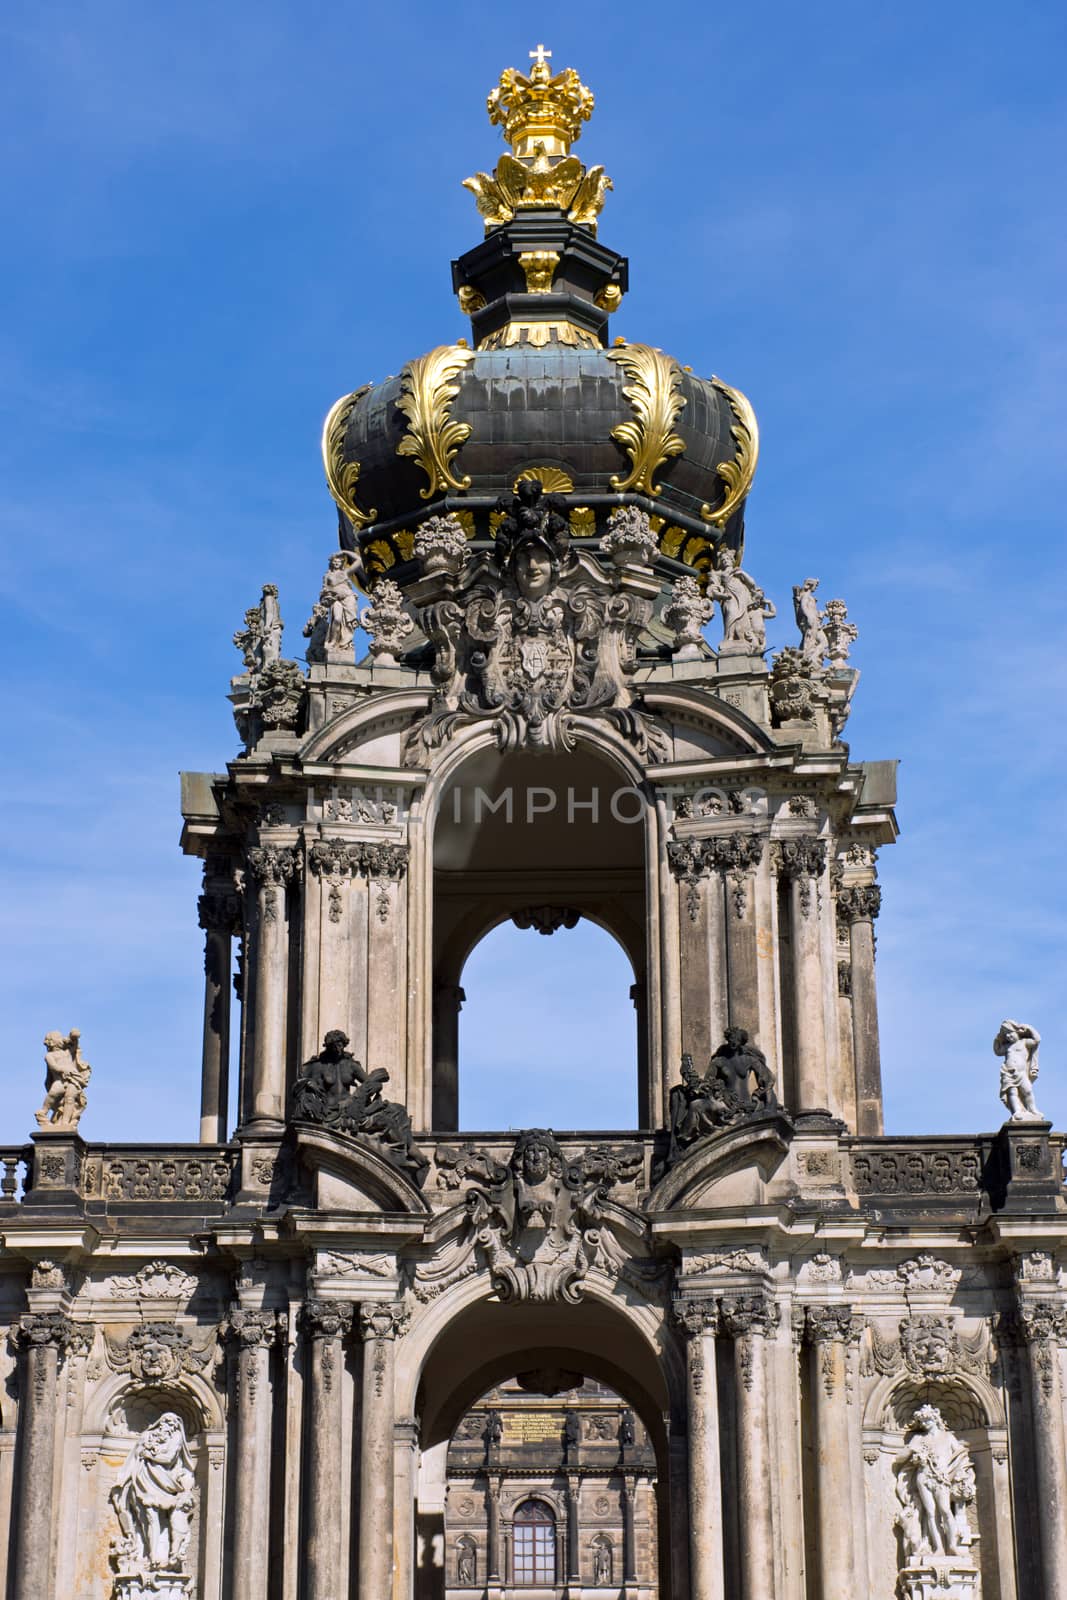 A detail of the Zwinger in Dresden, Germany